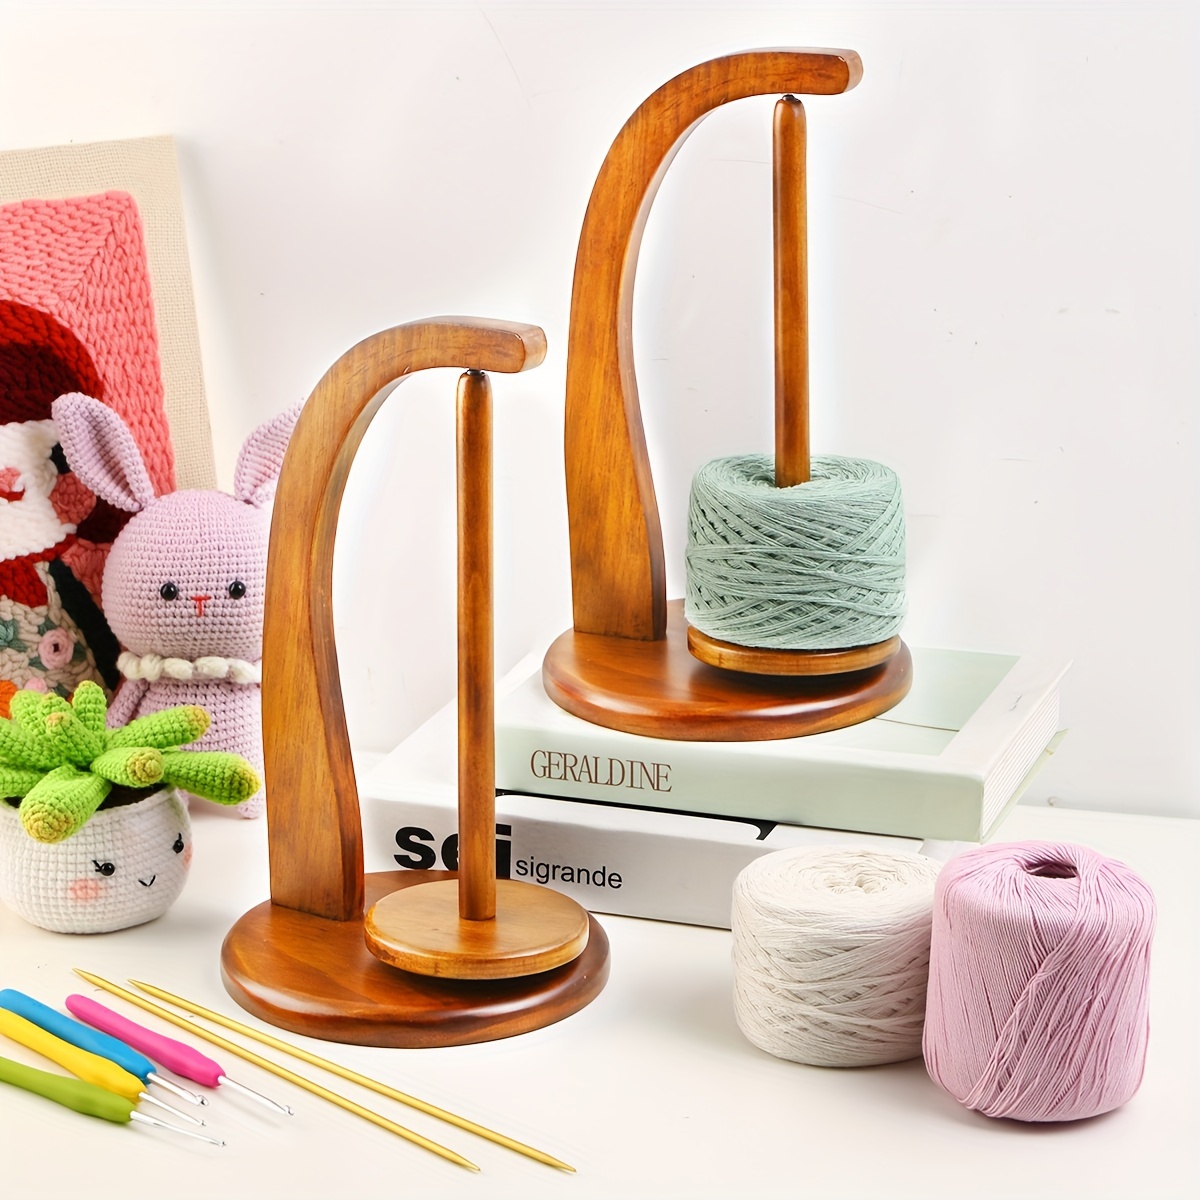 1pcs Portable Wrist Yarn Holder,wooden Wrist Yarn Holder,prevents Yarn  Tangling And Misalignment For Knitting Crochete,a